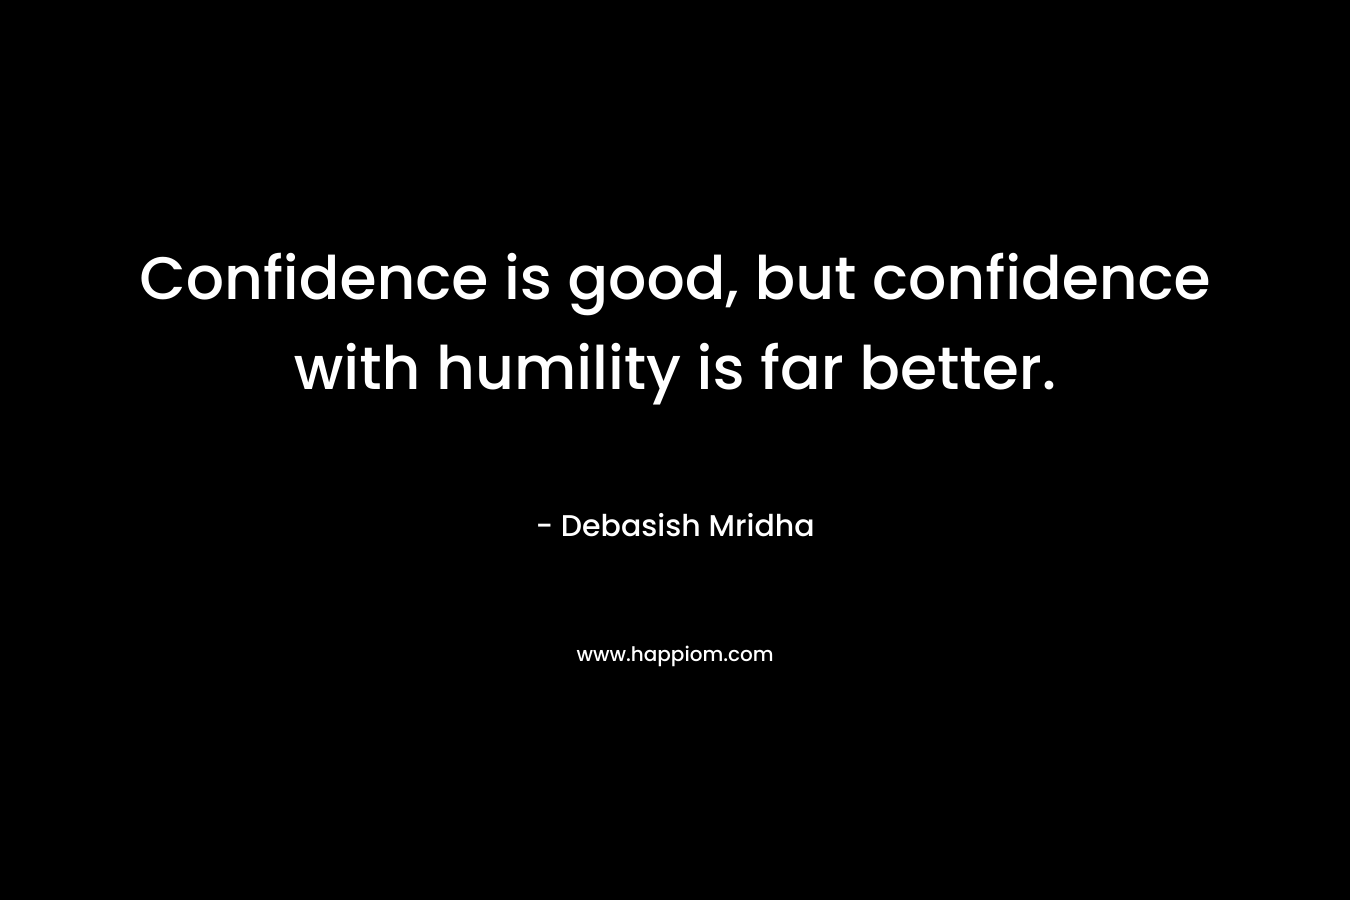 Confidence is good, but confidence with humility is far better.